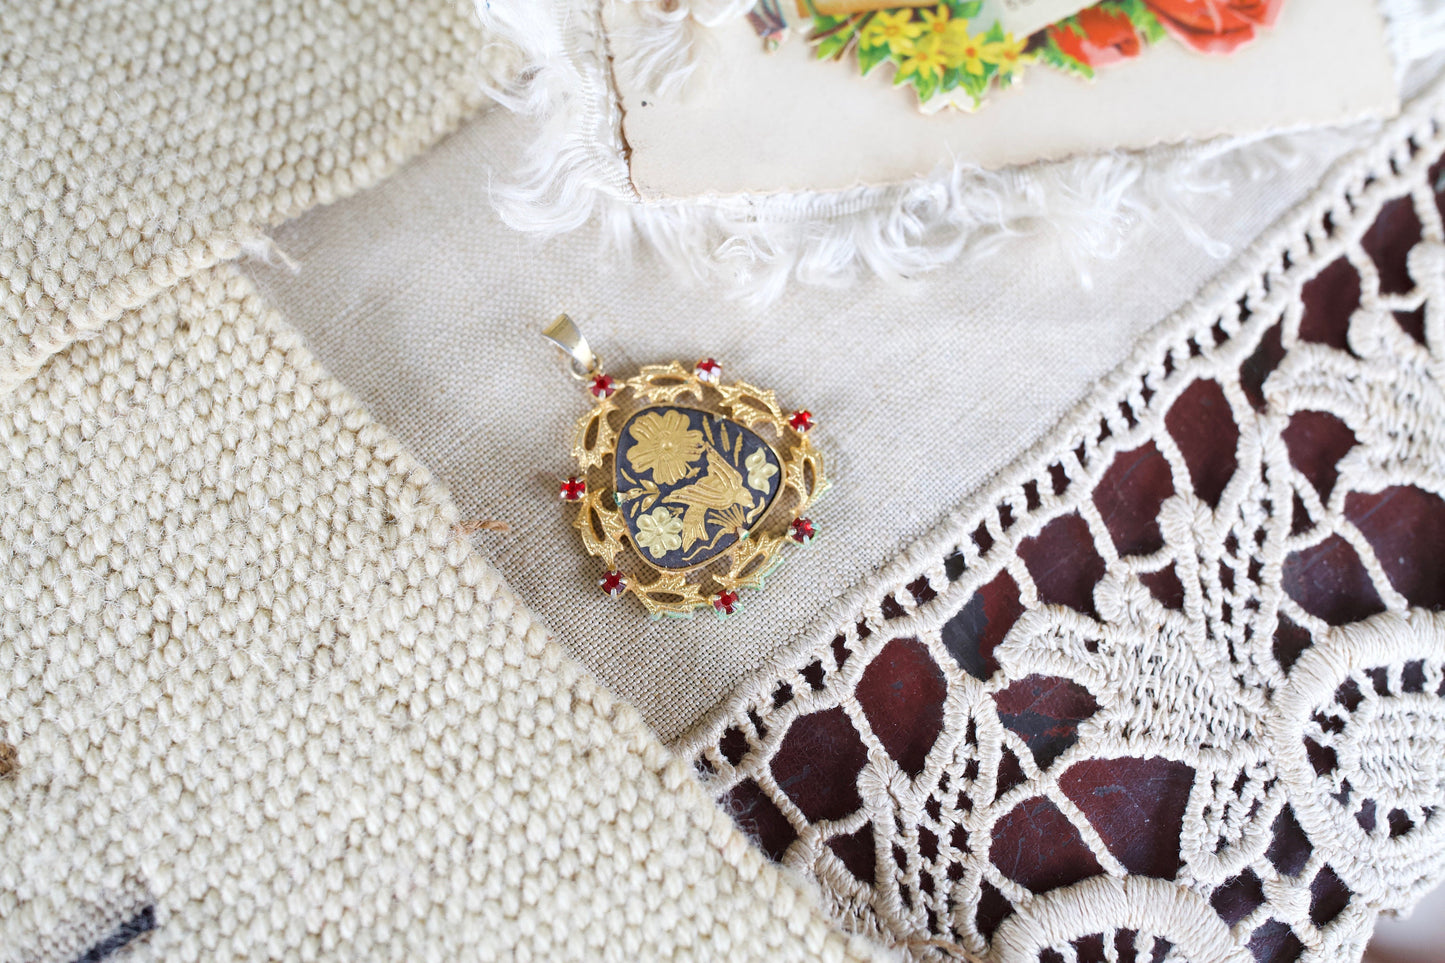 Vintage Pendant- Jewelry Pendant with Bird and Flowers - Red, Gold, and Black